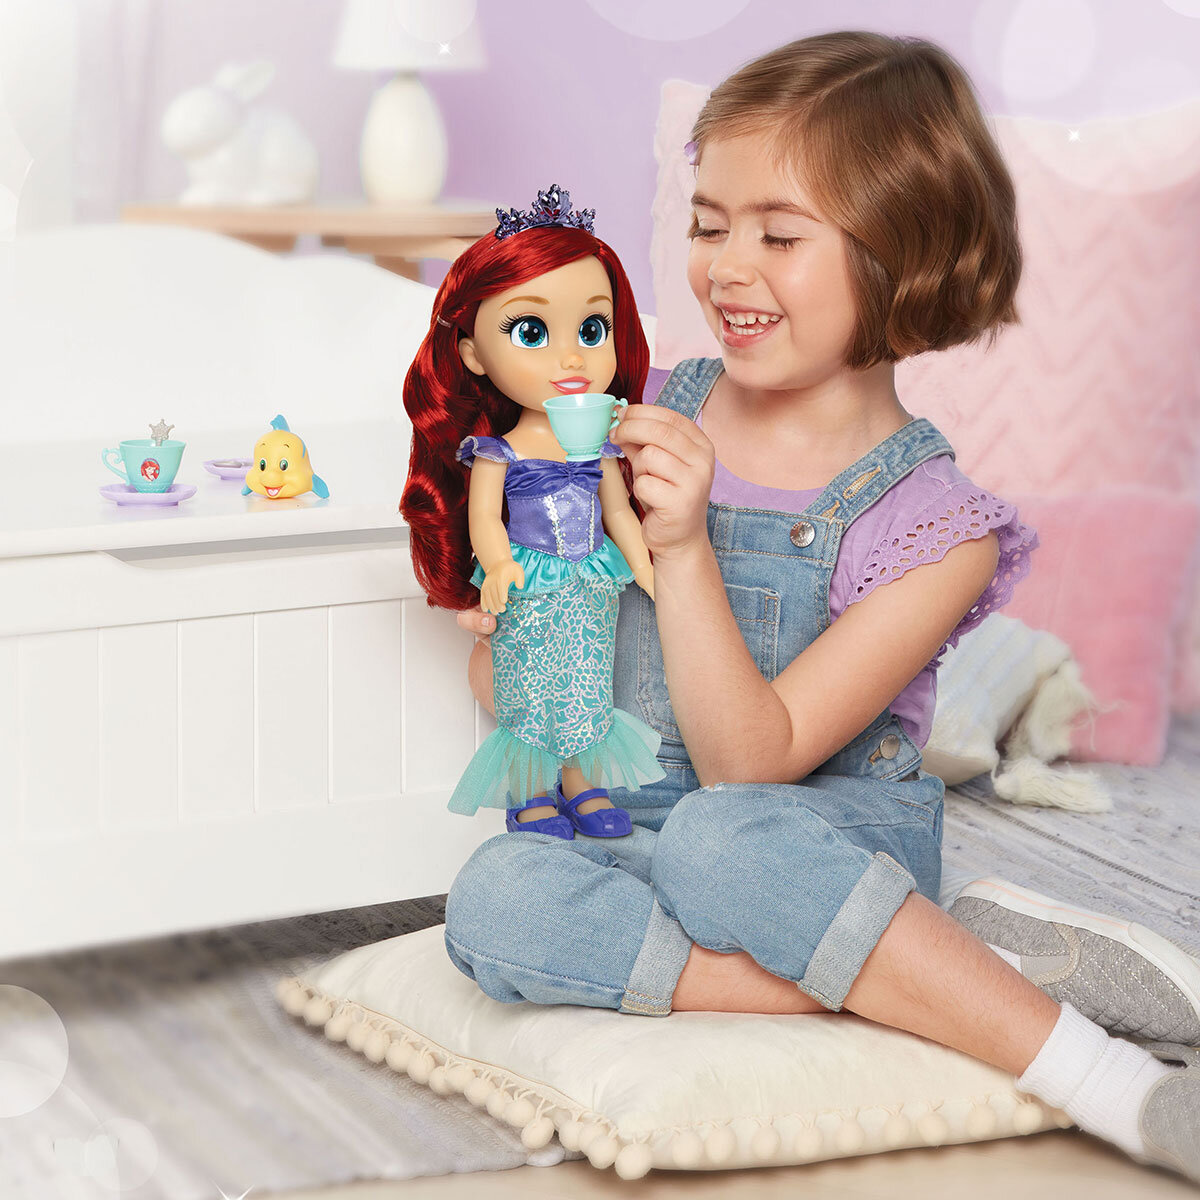 Buy Disney Tea Time Party Doll Ariel & Flounder Items Image at Costco.co.uk